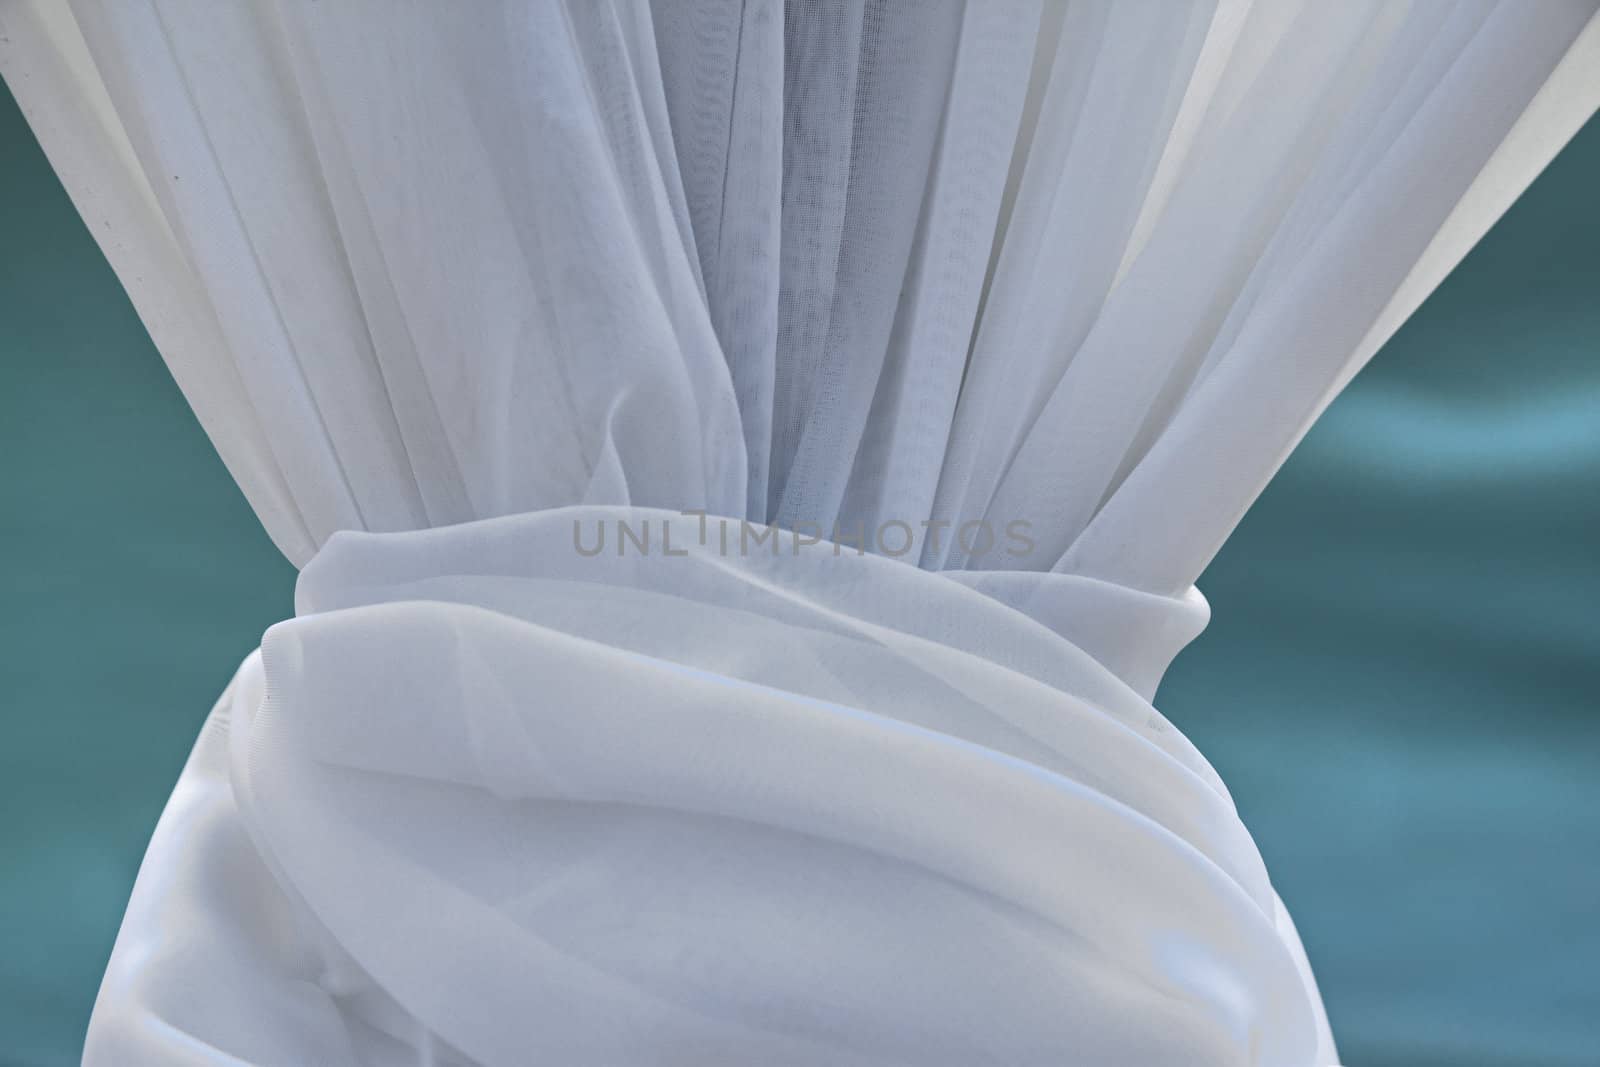 Draping decoration intended for use at a tropical wedding